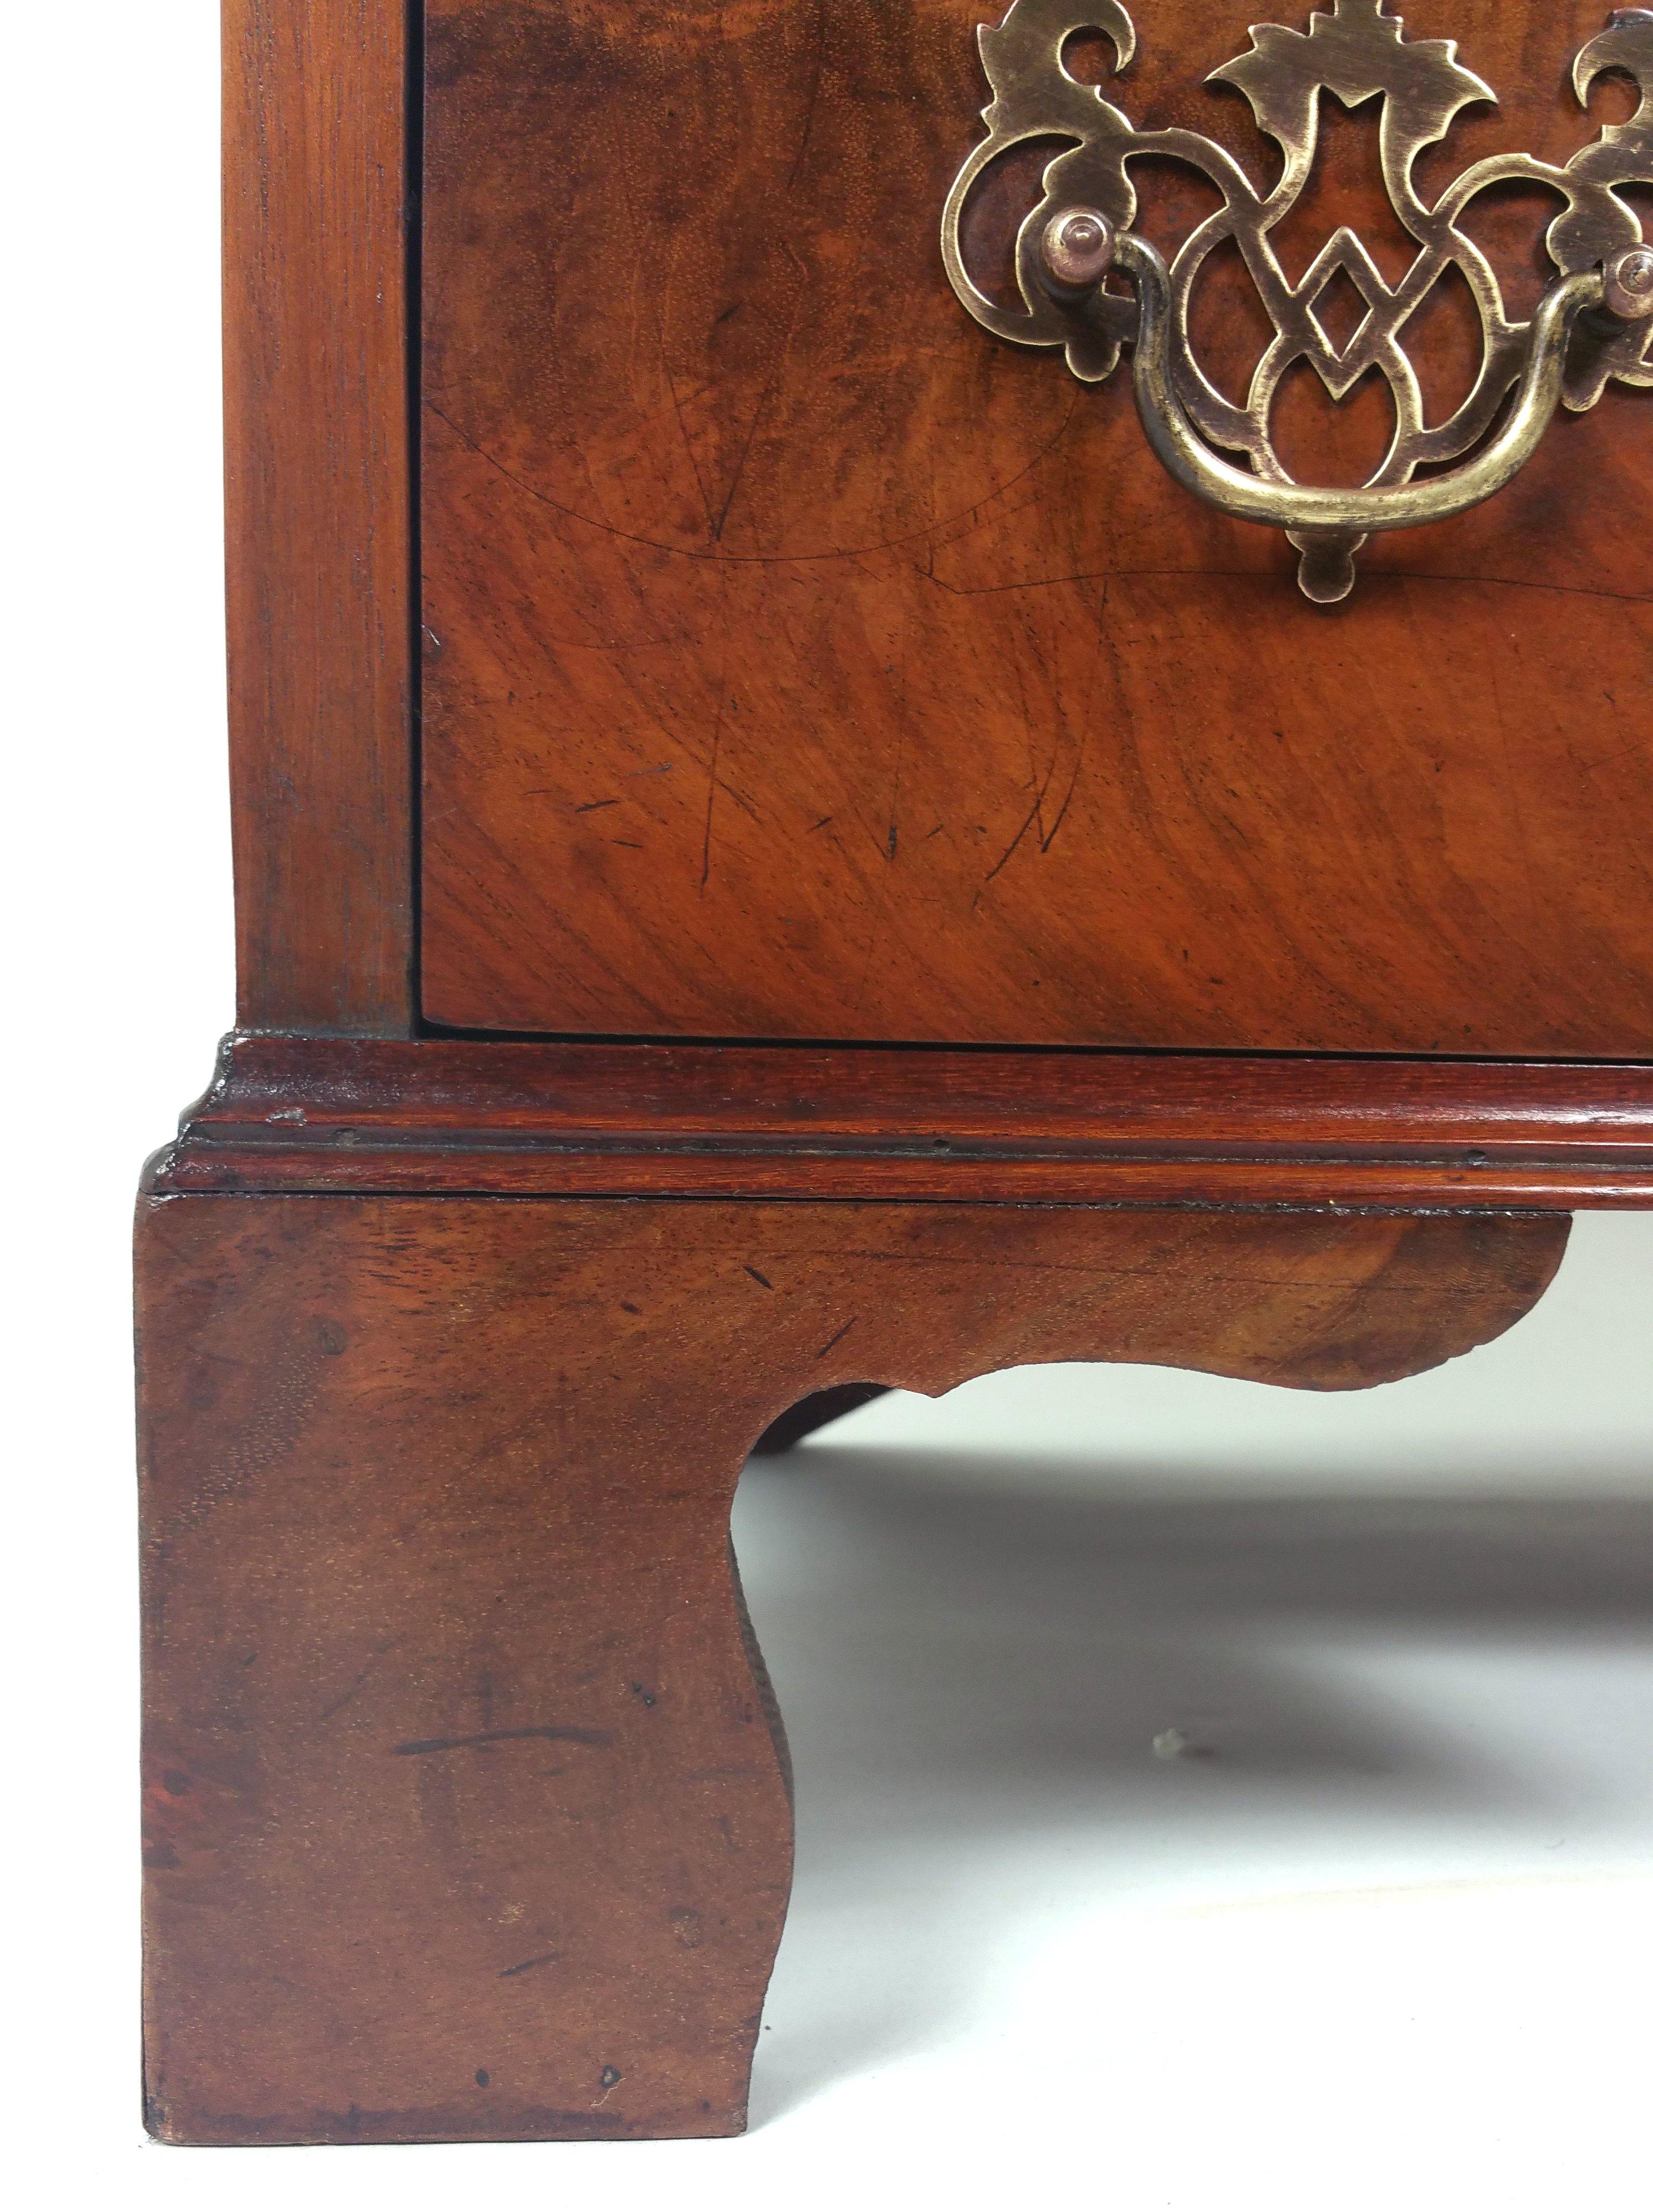 George III Mahogany Knee Hole Desk In Good Condition For Sale In London, west Sussex